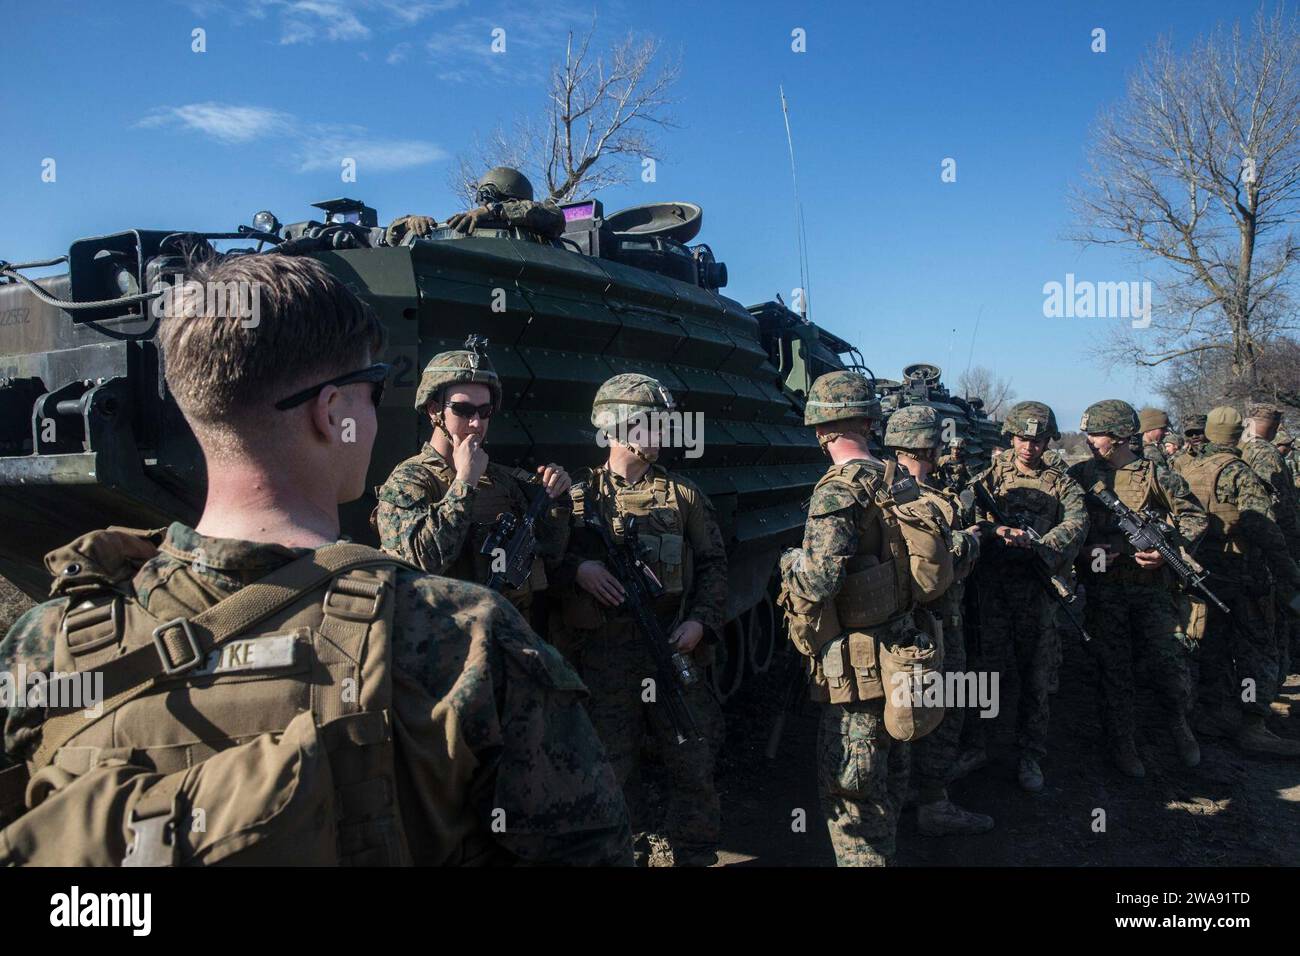 US military forces. 180311NZ408-0031 CAPU MIDIA TRAINING AREA, Romania (March 11, 2018) Marines with Fox Company, Battalion Landing Team, 2nd Battalion, 6th Marine Regiment, 26th Marine Expeditionary Unit, conduct AAV-P7/A1 assault amphibious vehicle familiarization training with members of the Romanian 307th Naval Infantry during exercise Spring Storm 2018, at Capu Midia Training Area, Romania, March 11, 2018. Spring Storm is a Romanian-led exercise in the Black Sea to enhance amphibious operations and staff interoperability between Romanian and U.S. naval forces. (U.S. Marine Corps photo by Stock Photo